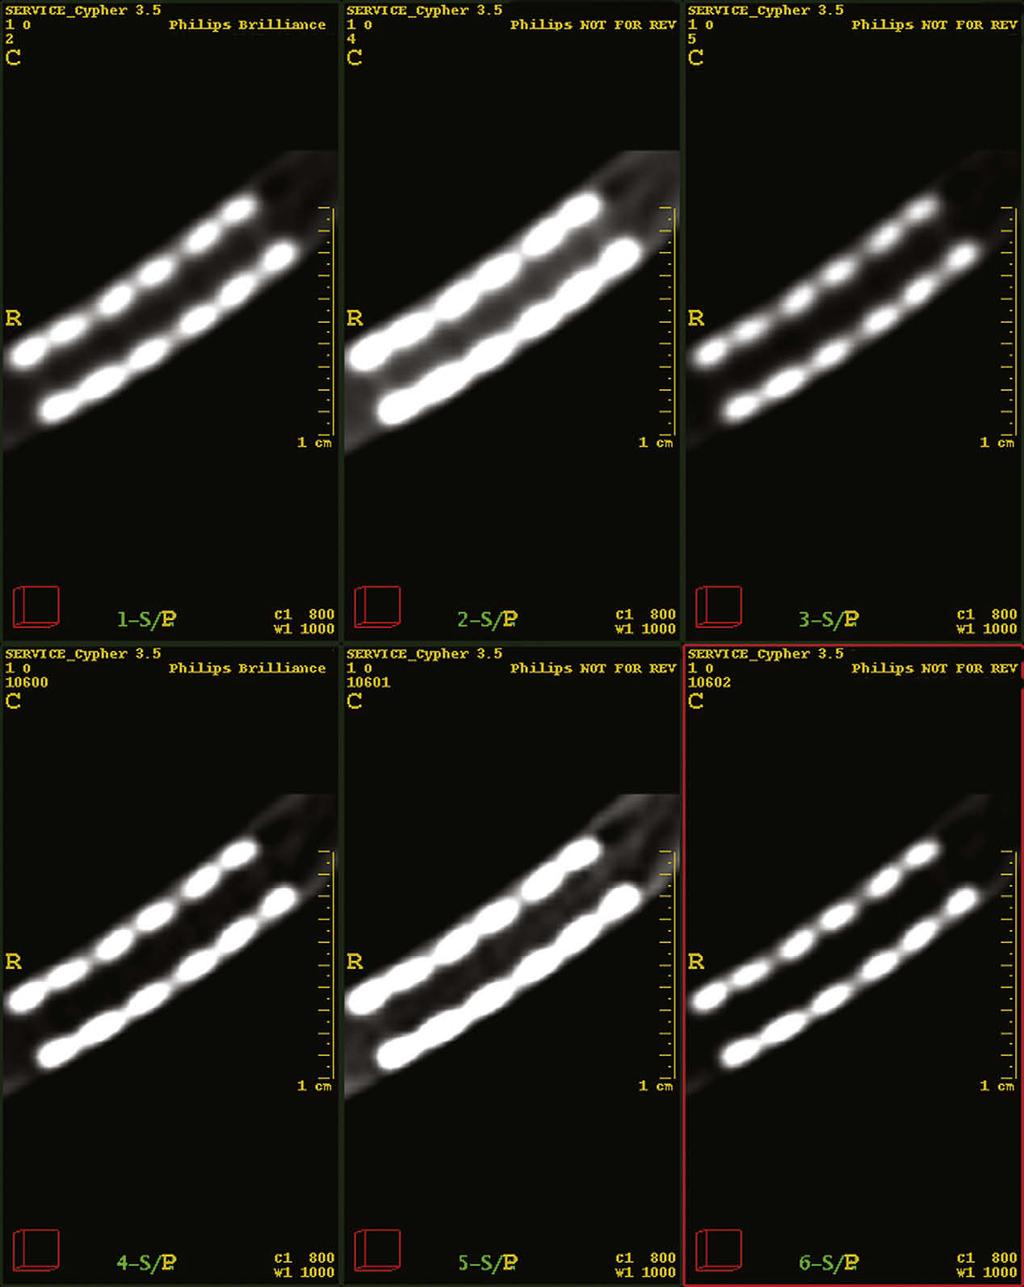 HALPERN ET AL Academic Radiology, Vol -, No-, - 2009 Figure 2. Multiphase display of a 3.5-mm stent that was imaged in an oblique orientation to the scan plane.